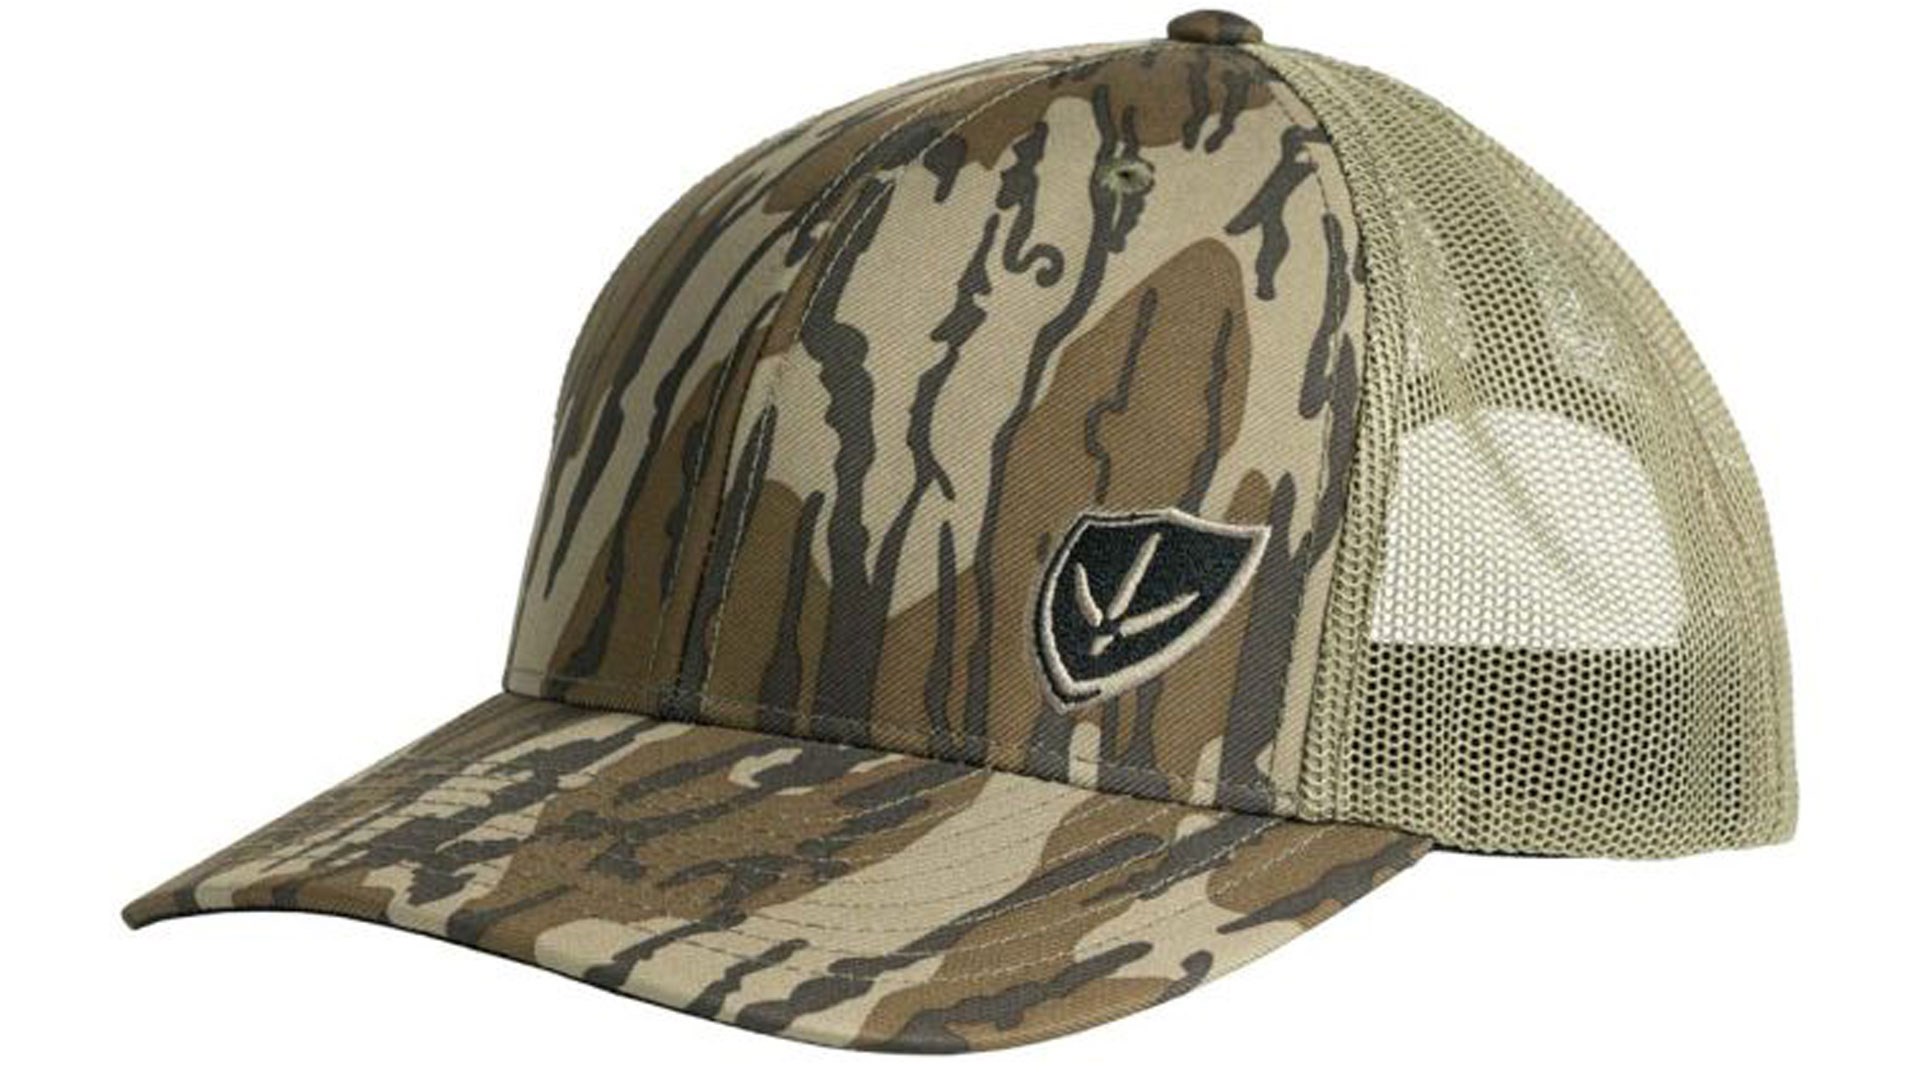 Finisher Cap in Bottomlands on white